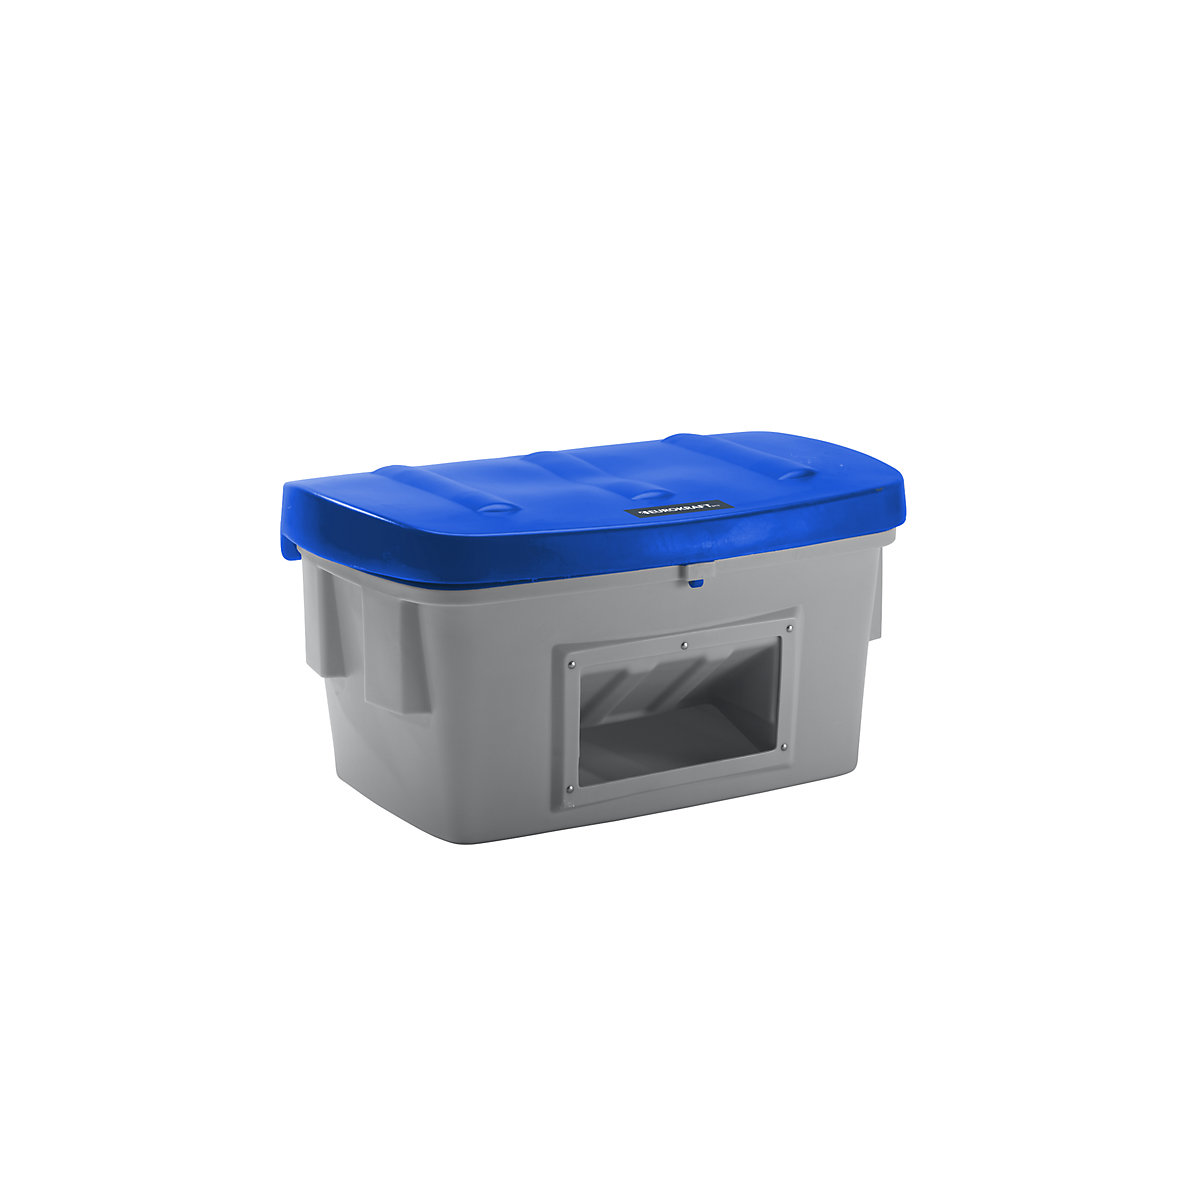 Universal / grit container – eurokraft pro, with dispenser opening, 400 l, blue lid-12